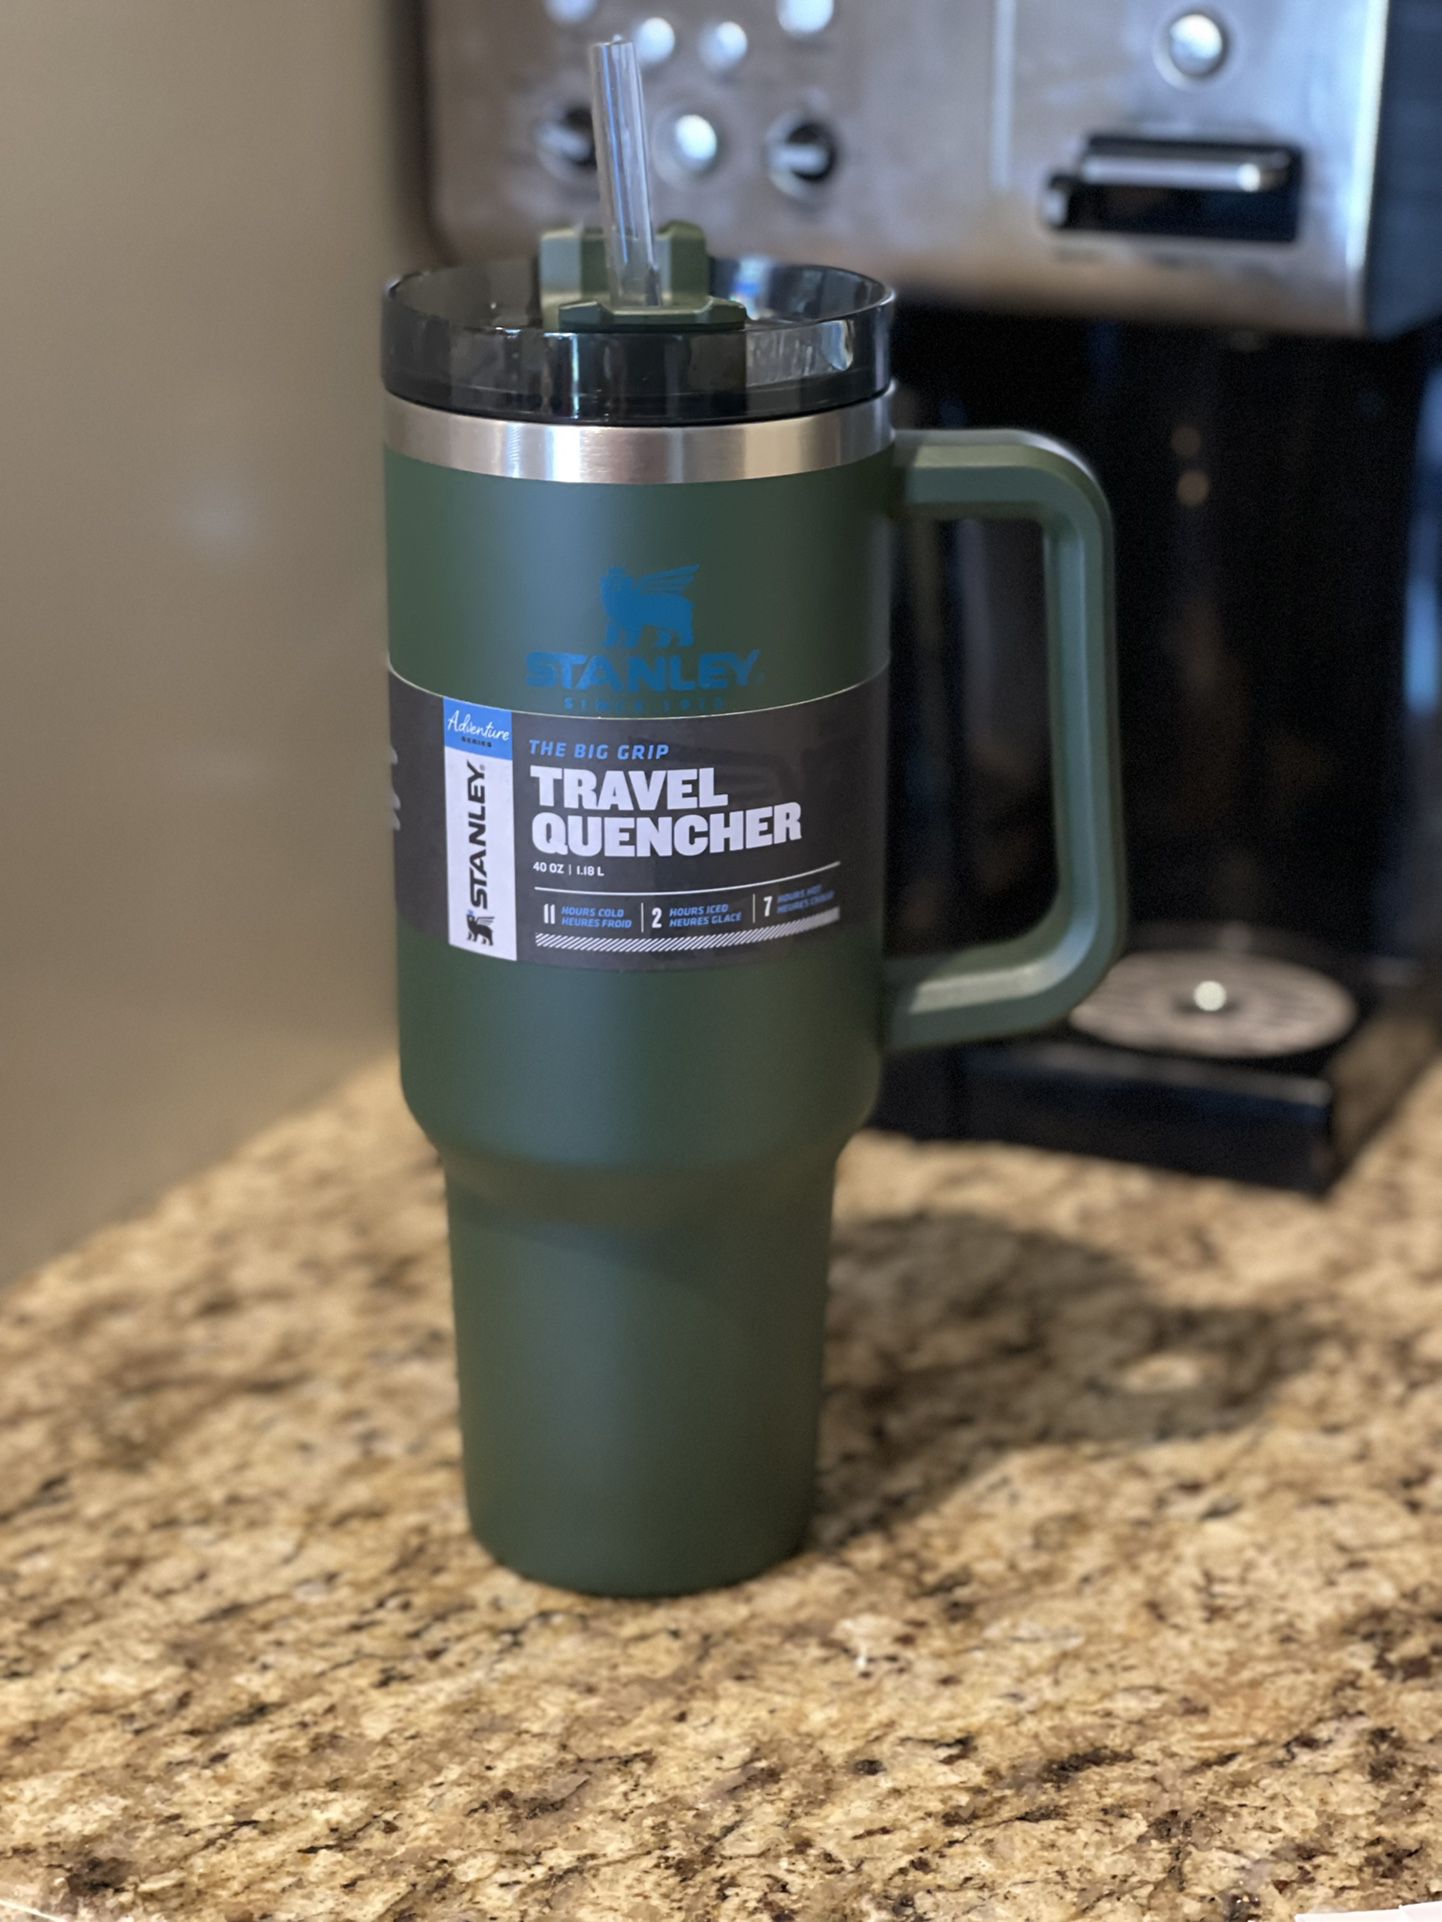 Stanley 40oz travel quencher tumbler cup in spirulina green!